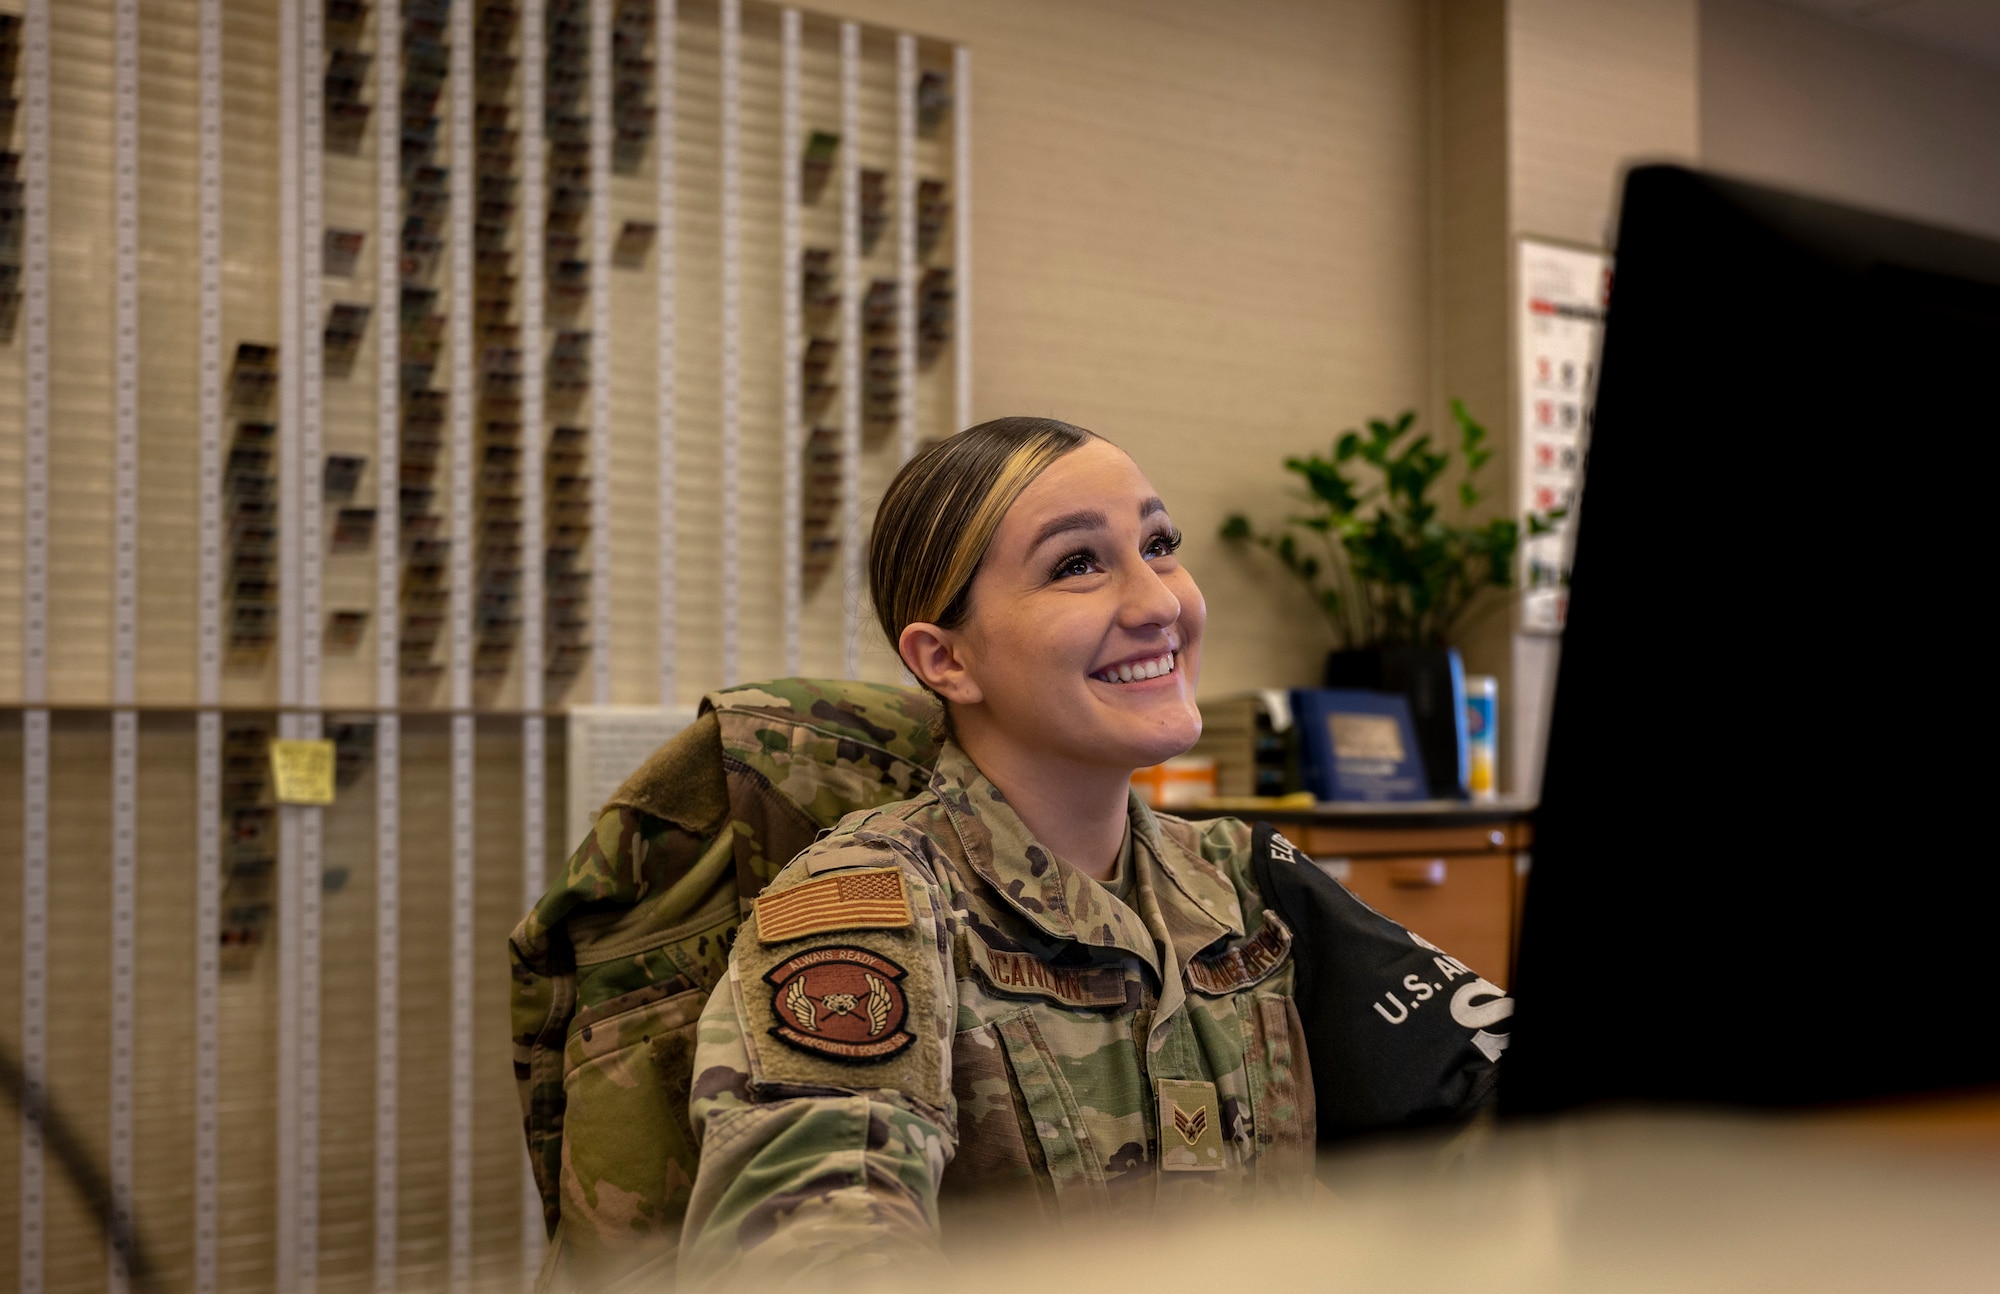 U.S. Air Force Senior Airman Elizabeth Scantlan, 51st Security Forces Squadron response force leader, poses for a photo in celebration of Women’s History Month at Osan Air Base, Republic of Korea, March 27, 2023.